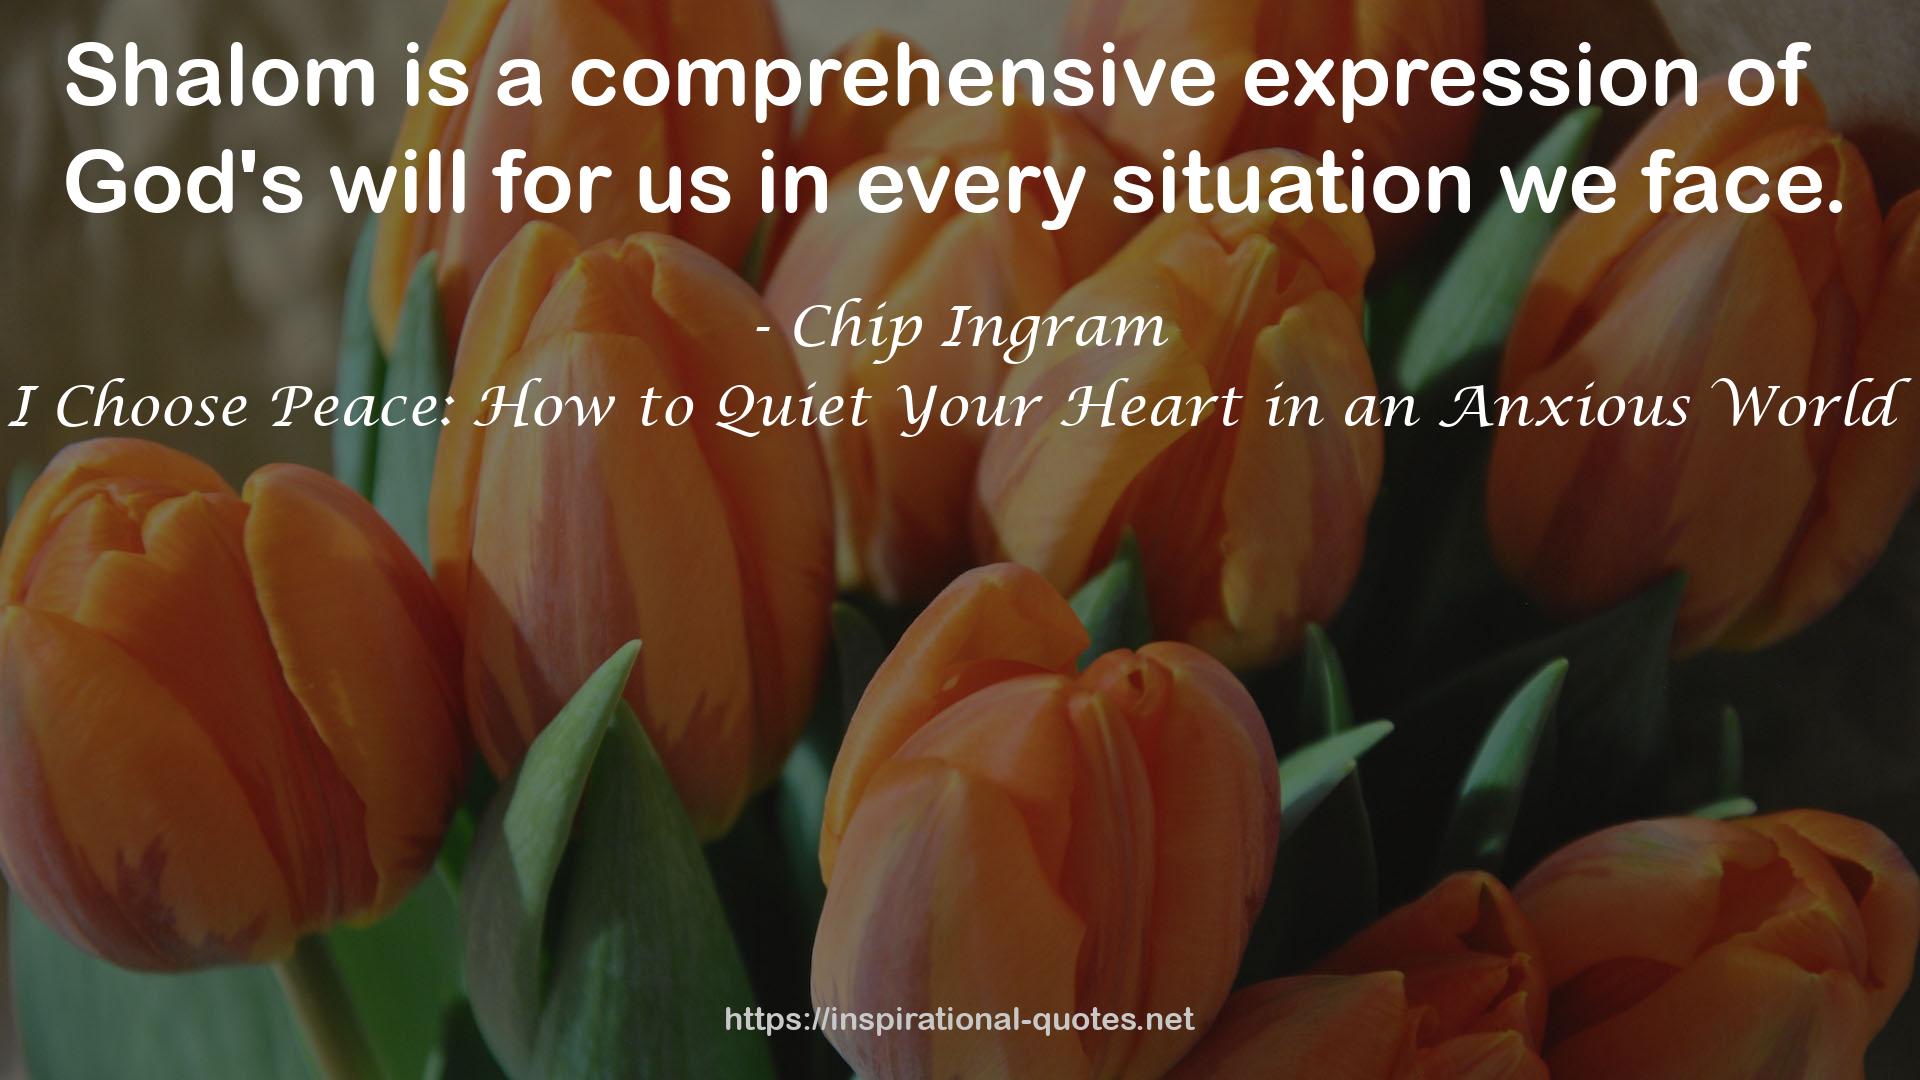 I Choose Peace: How to Quiet Your Heart in an Anxious World QUOTES